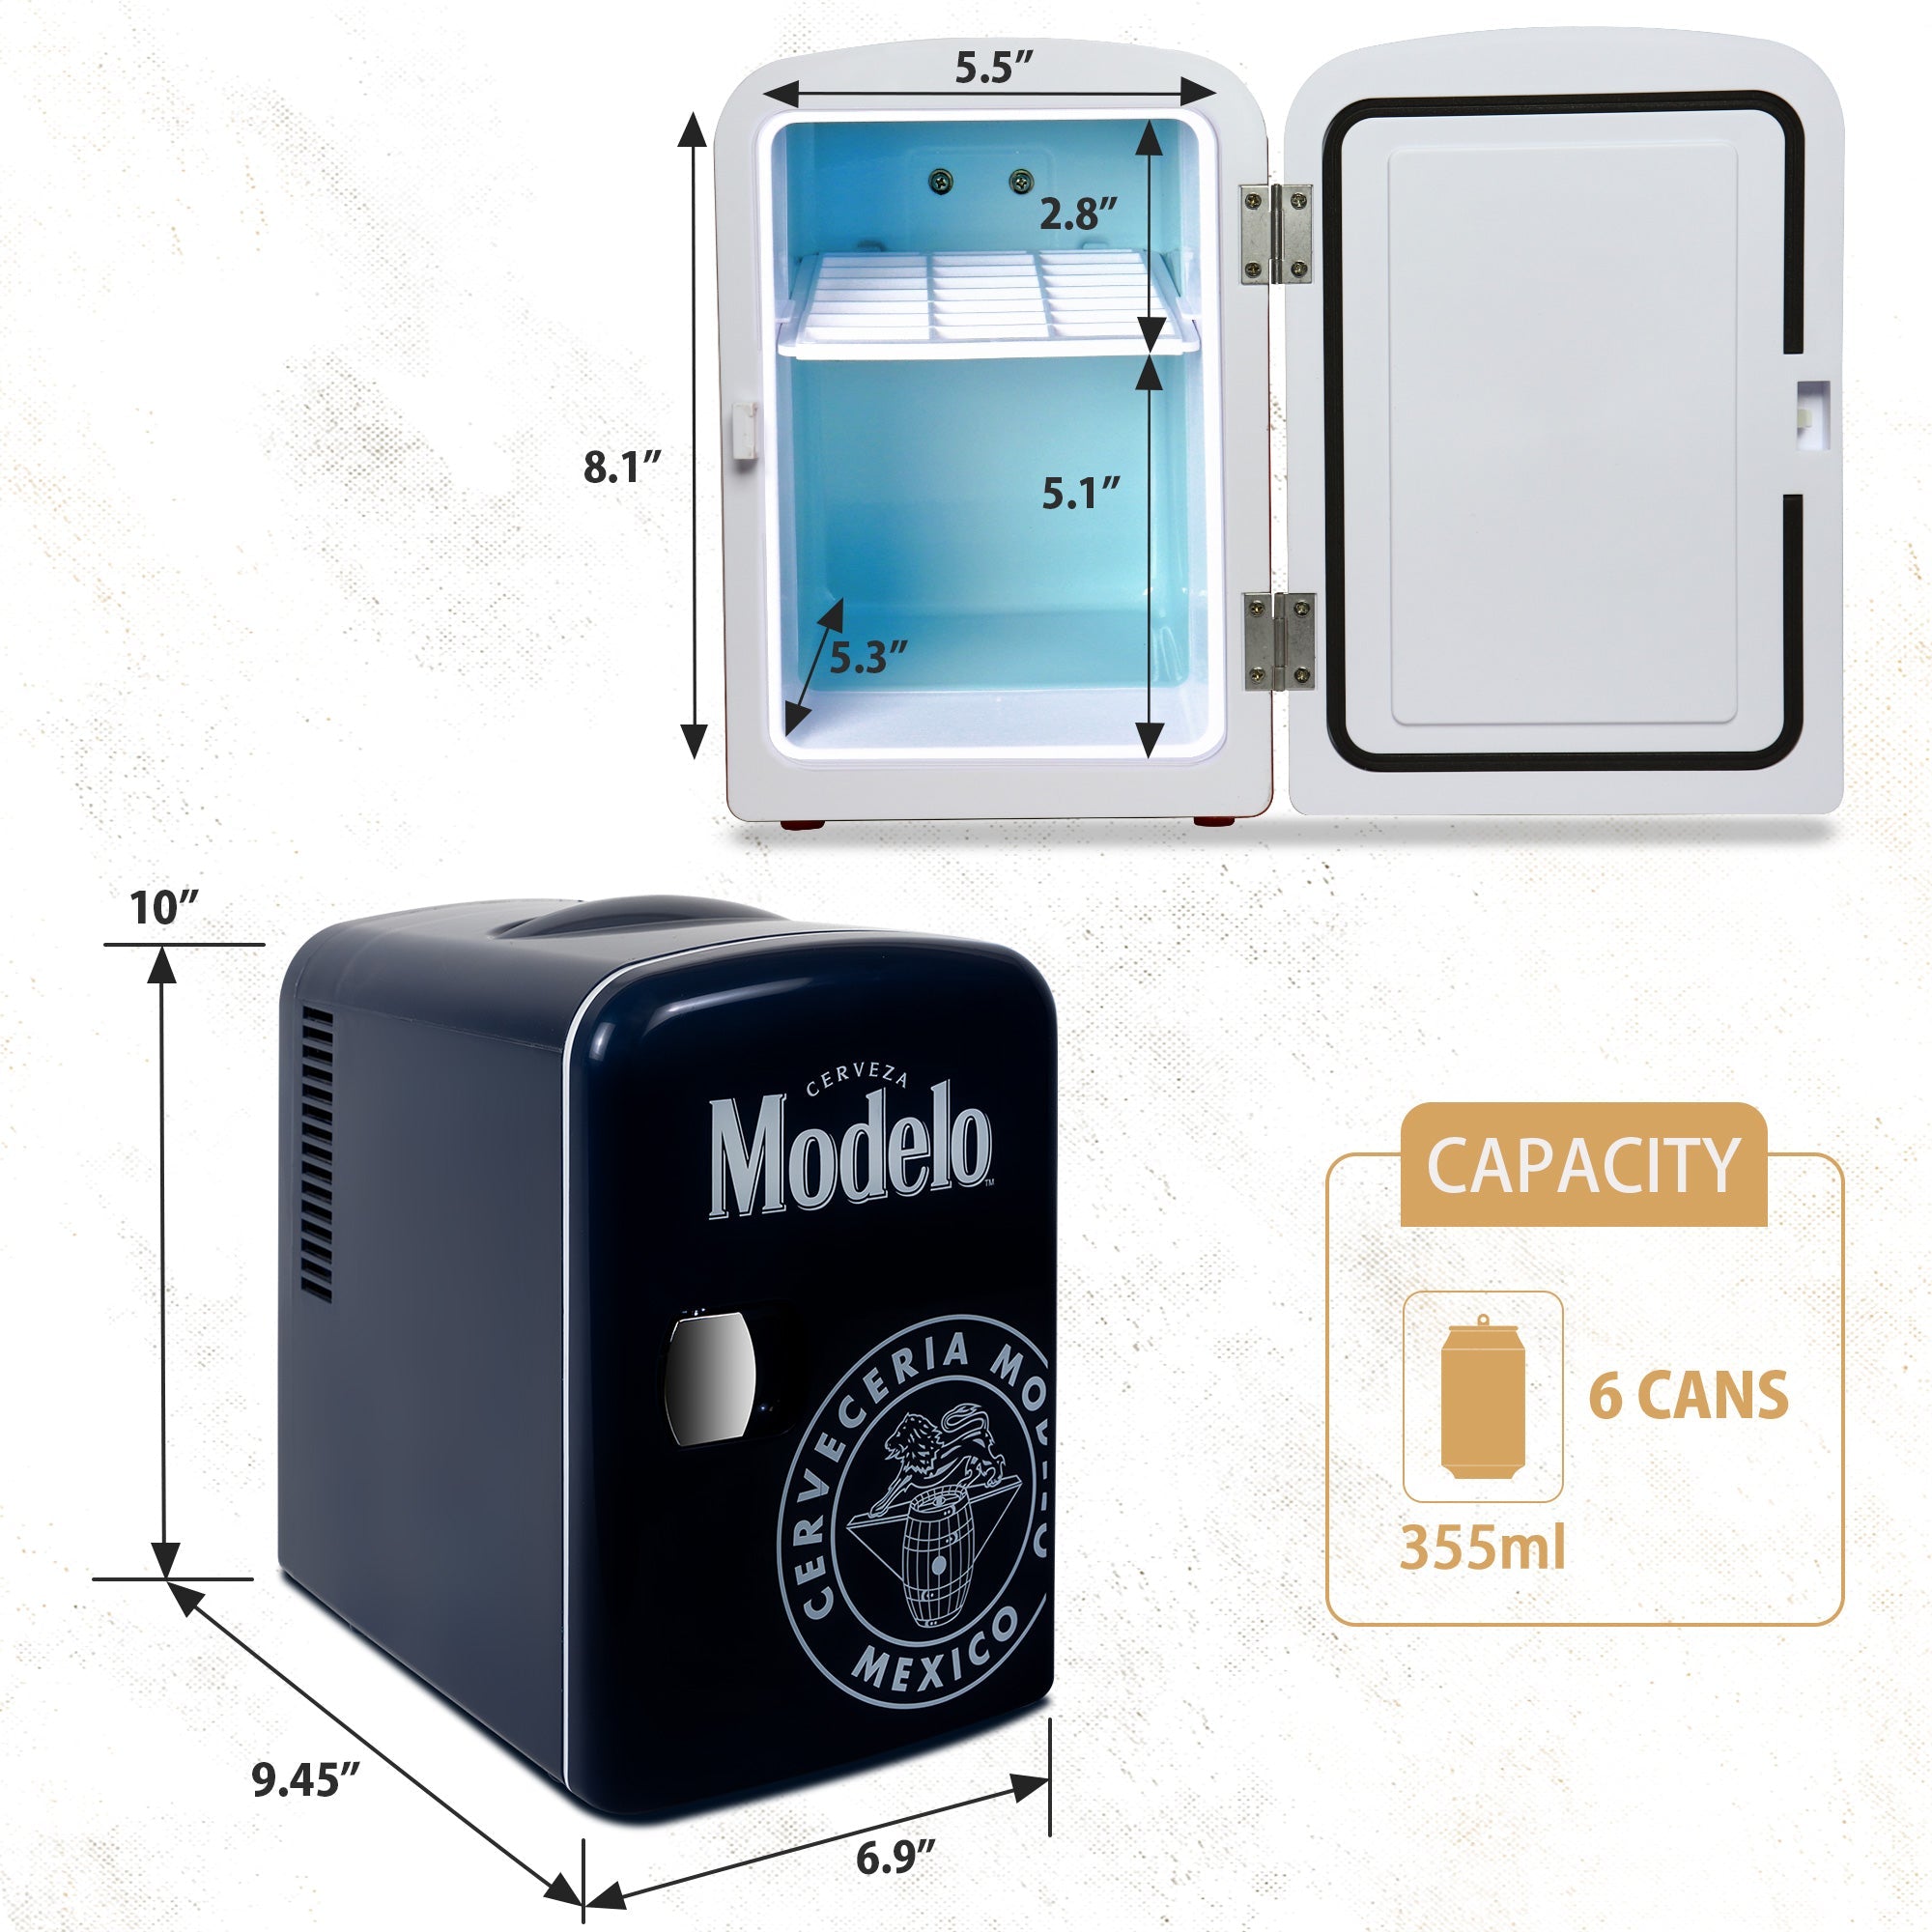 Two product shots of Modelo 4L mini fridge, open and closed, on a marbled white background, with interior and exterior dimensions labeled. Inset text and icons describes: Capacity - 6 cans 355 mL